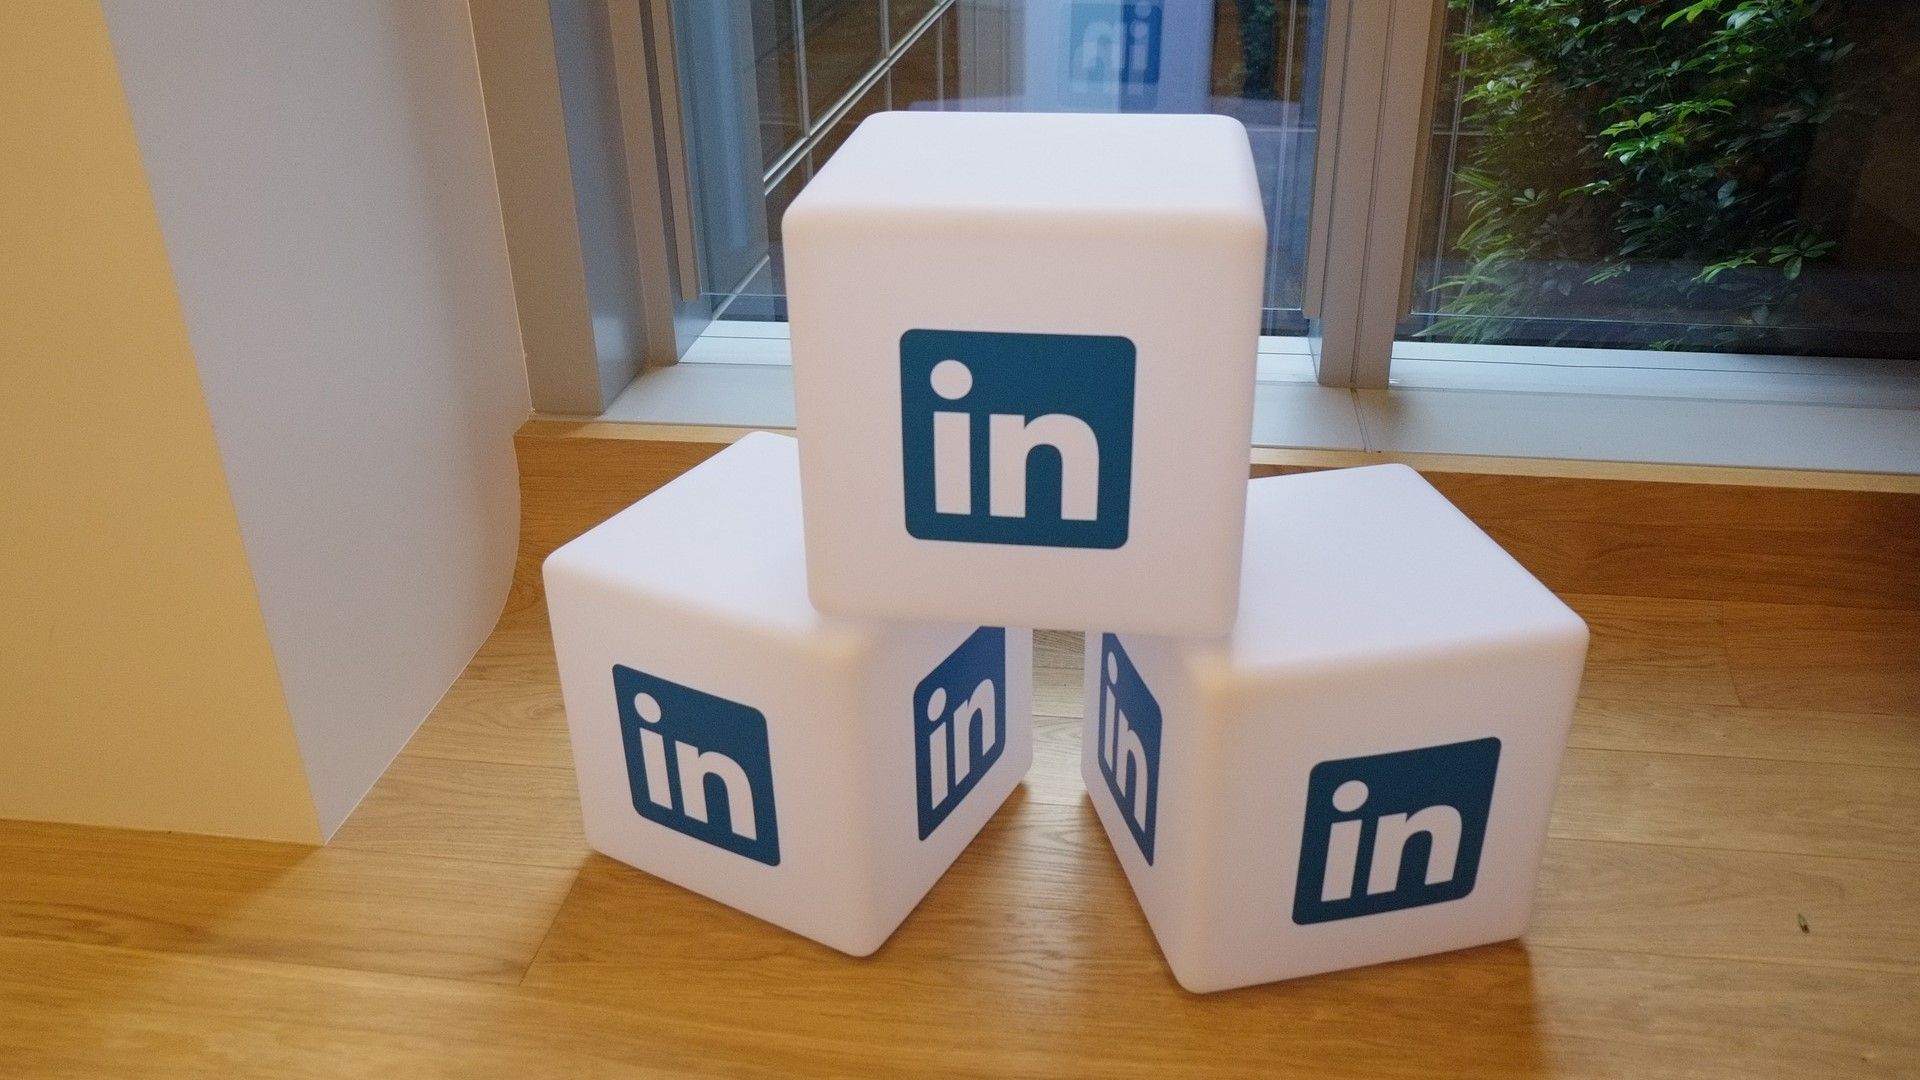 Three white blocks with the LinkedIn logo stacked on a wooden floor